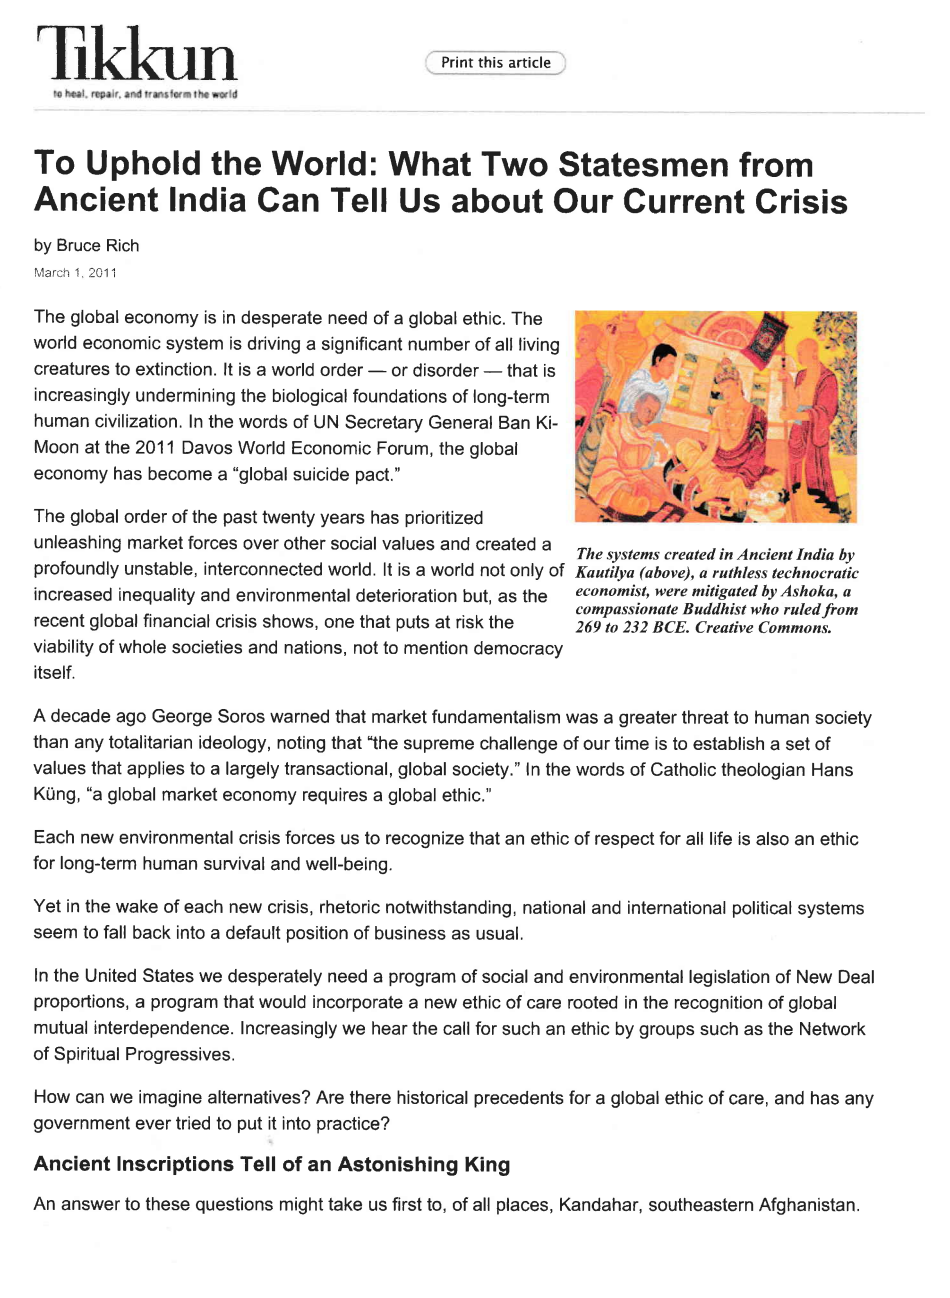 To Uphold the World: What Two Statesmen from Ancient India Can Tell Us about Our Current Crisis